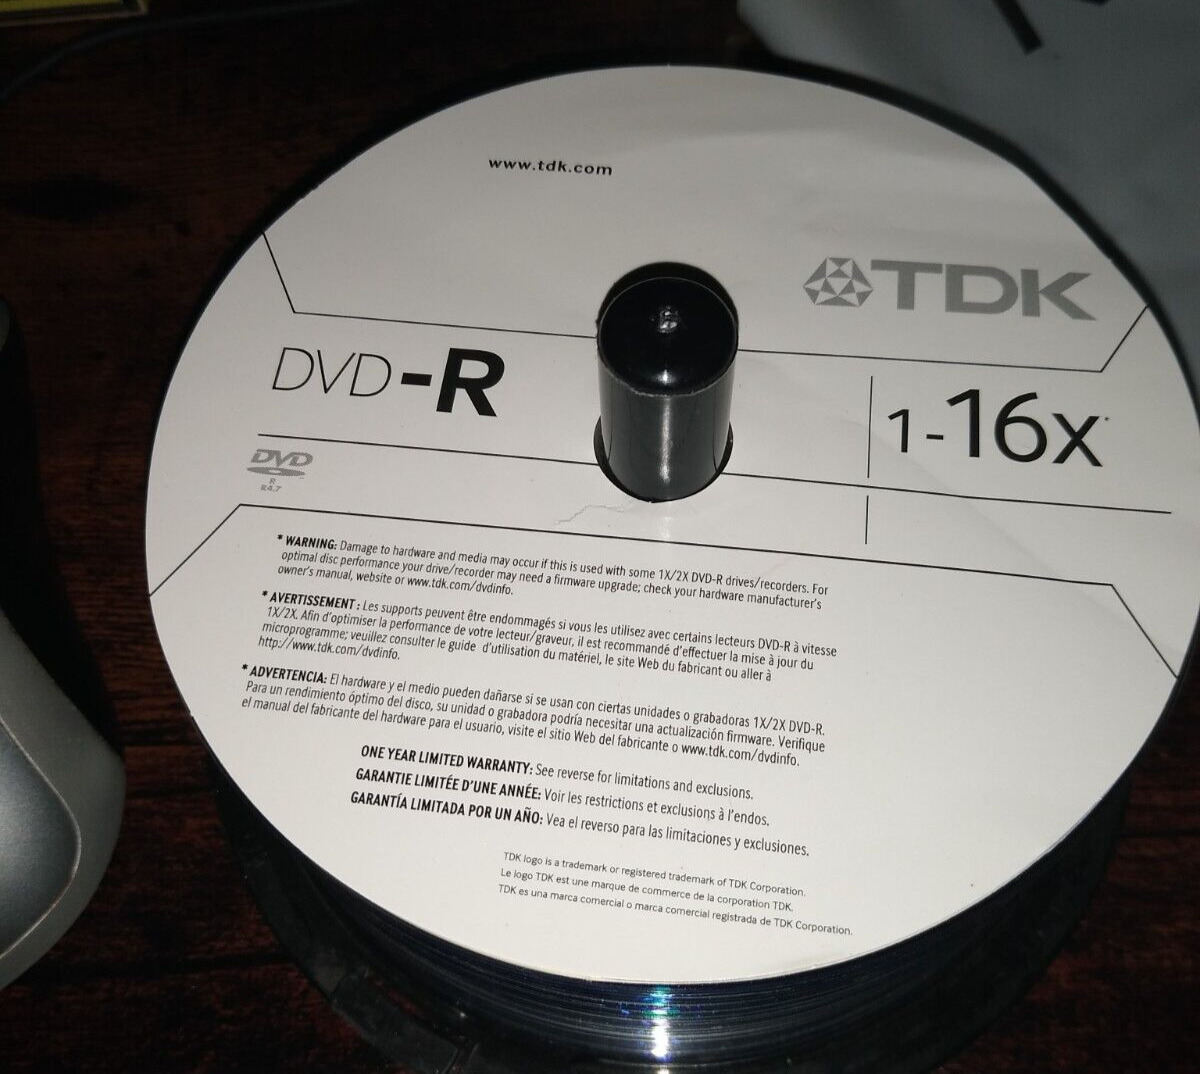 (37 disc) DVD-R 1-16x 4.7 GB TDK new never used, 